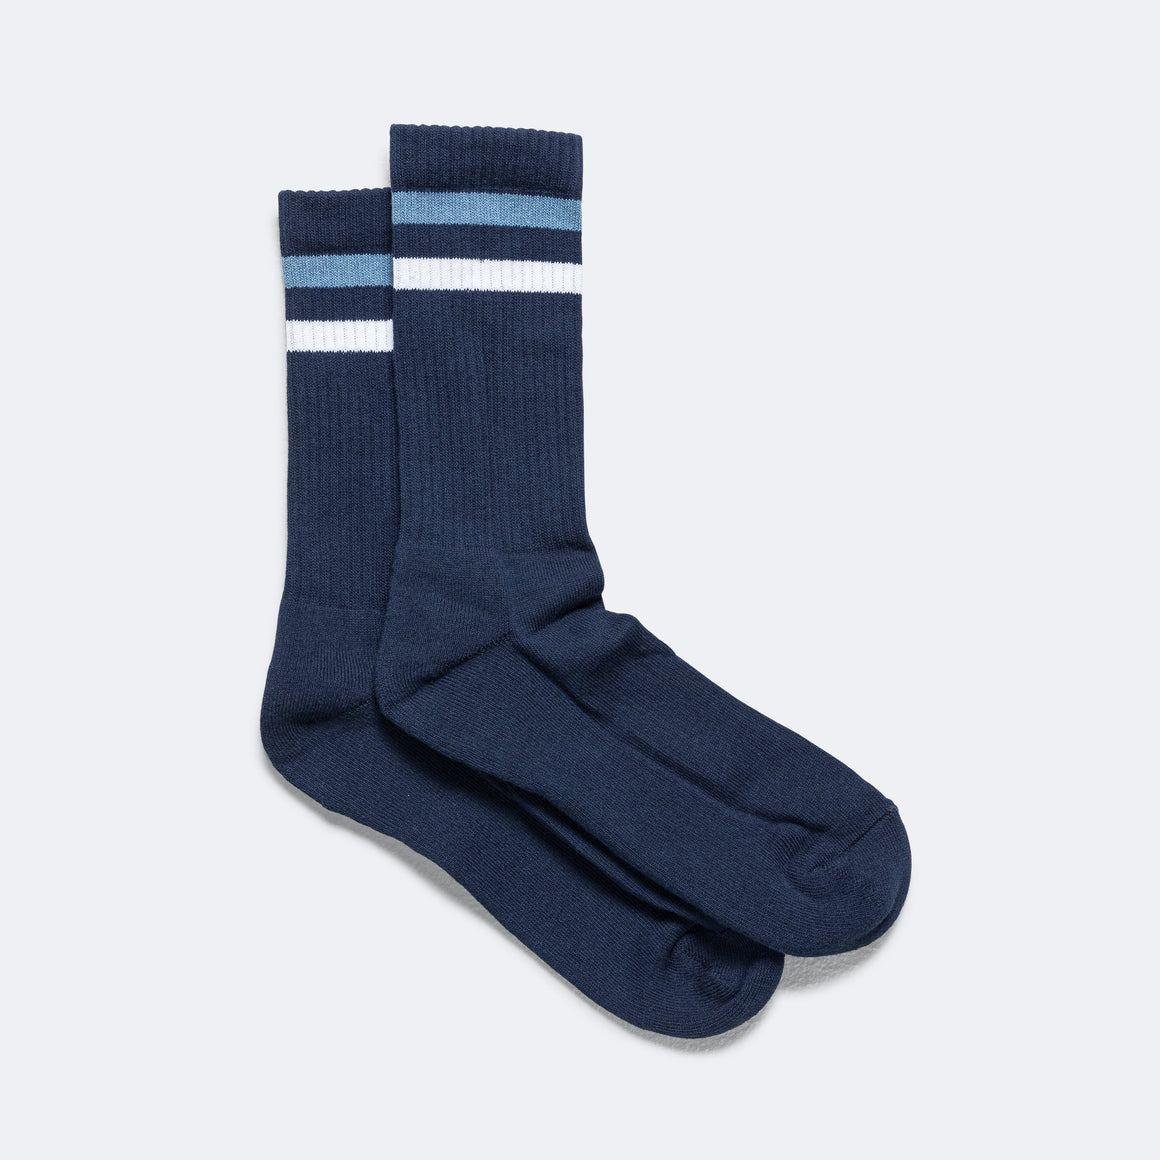 Lite Year - Cotton Cap Crew Socks - Navy/Lt. Blue - UP THERE